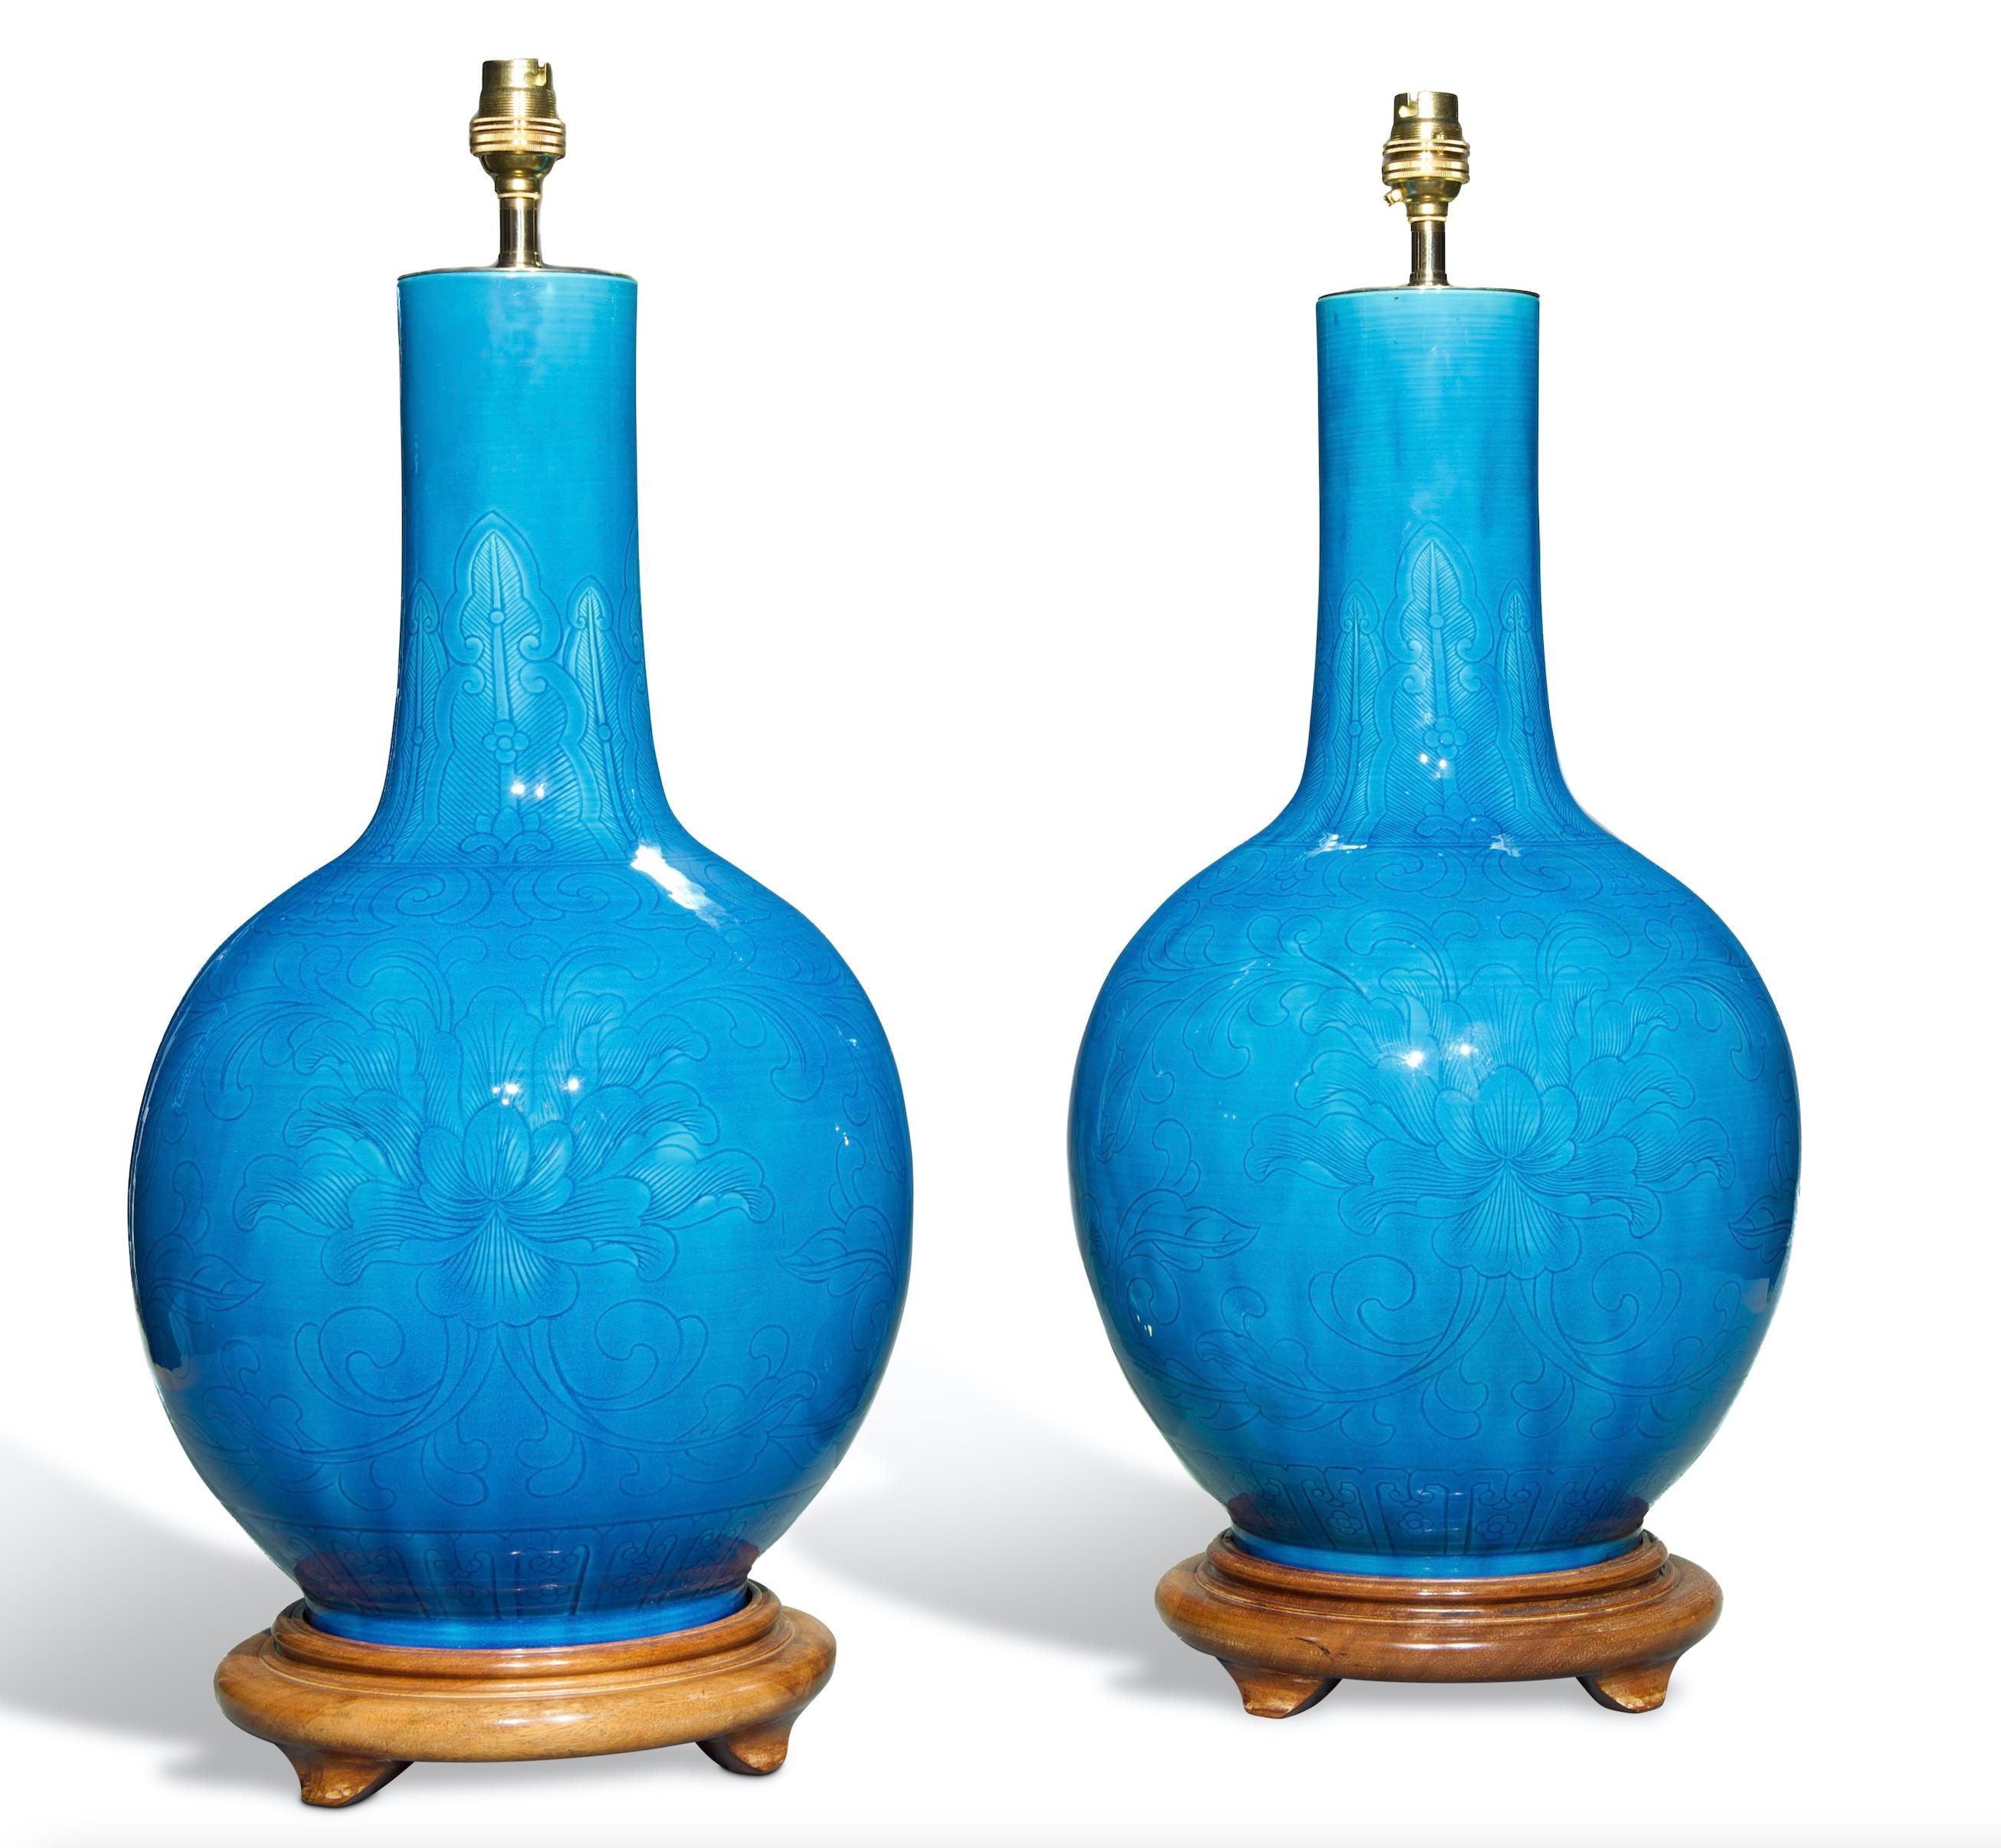 A superb pair of late Qing Dynasty Chinese porcelain vases, with a wonderful turquoise glaze and subtle swirling foliate and floral line pattern decoration, now mounted as lamps with turned wooden bases

Measures: Height of vases: 19 3/4 in (50